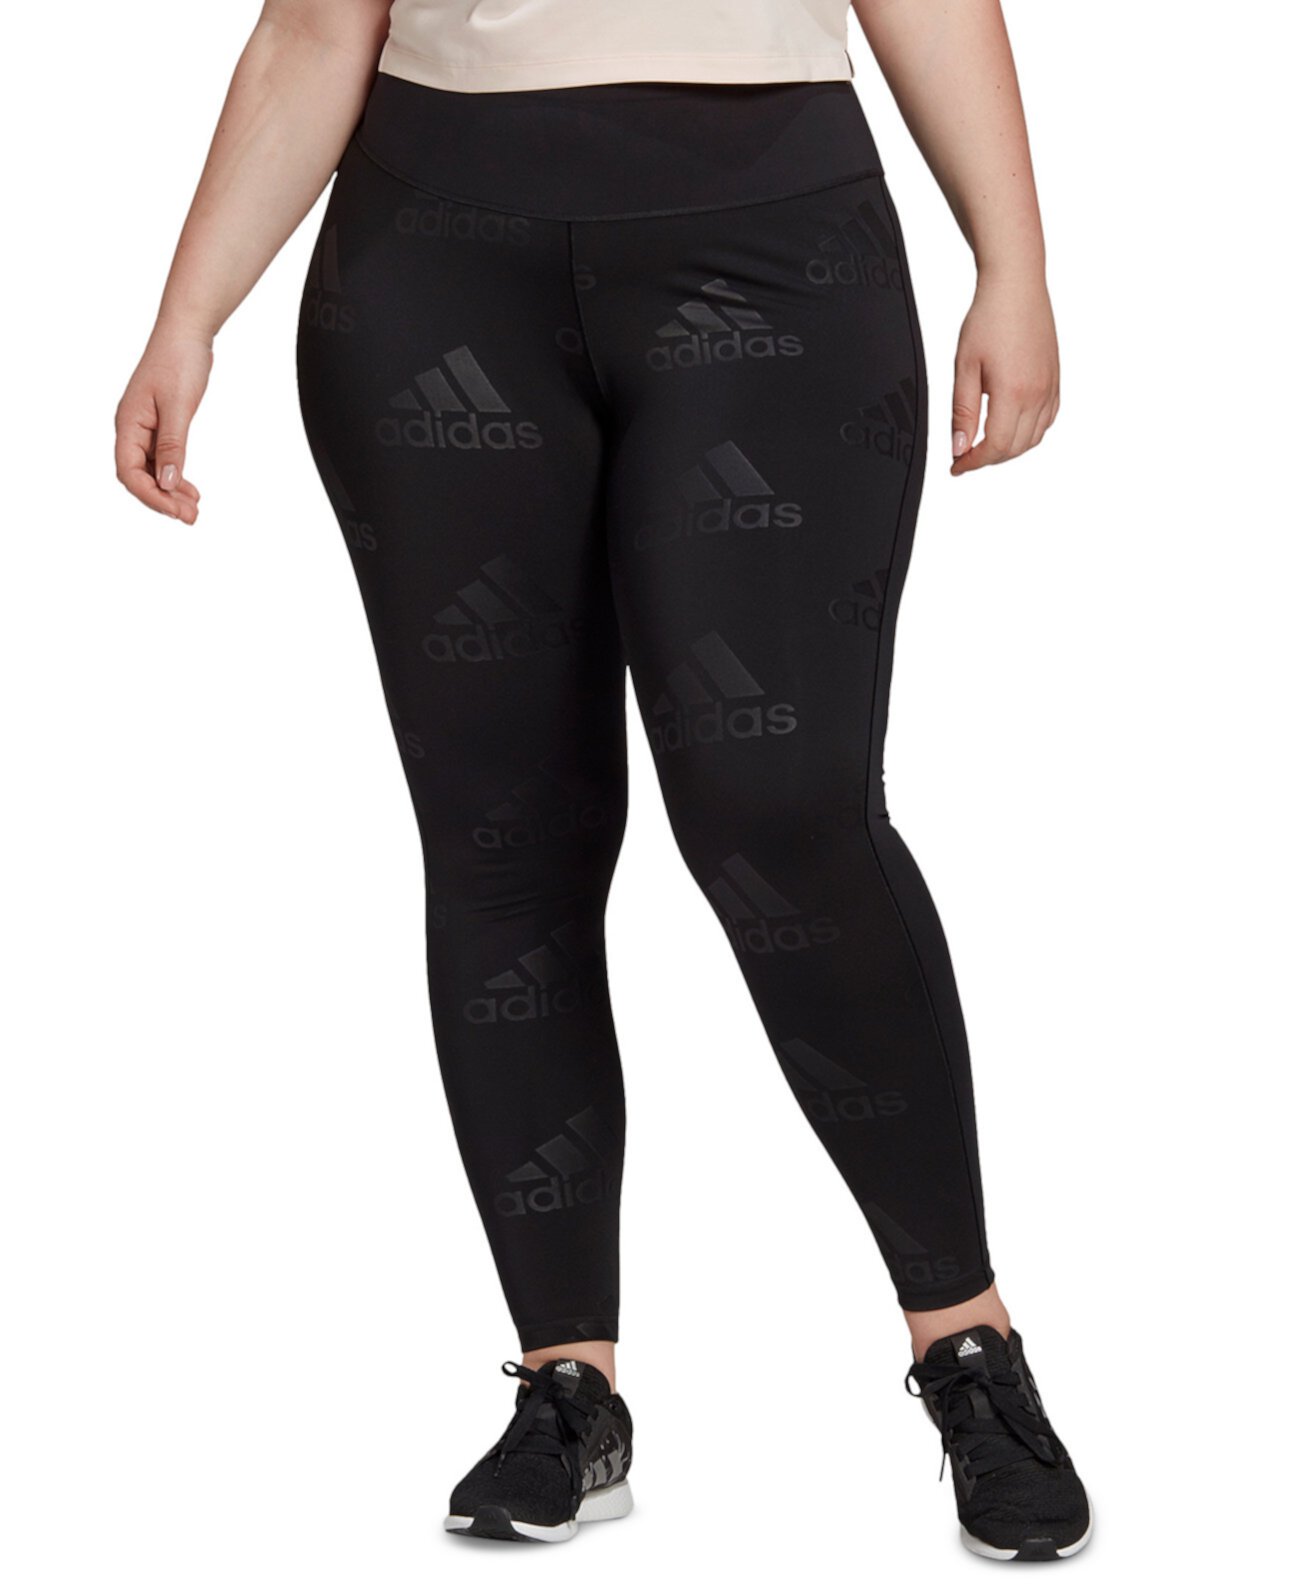 Plus Size Believe This Athletic Pants Adidas